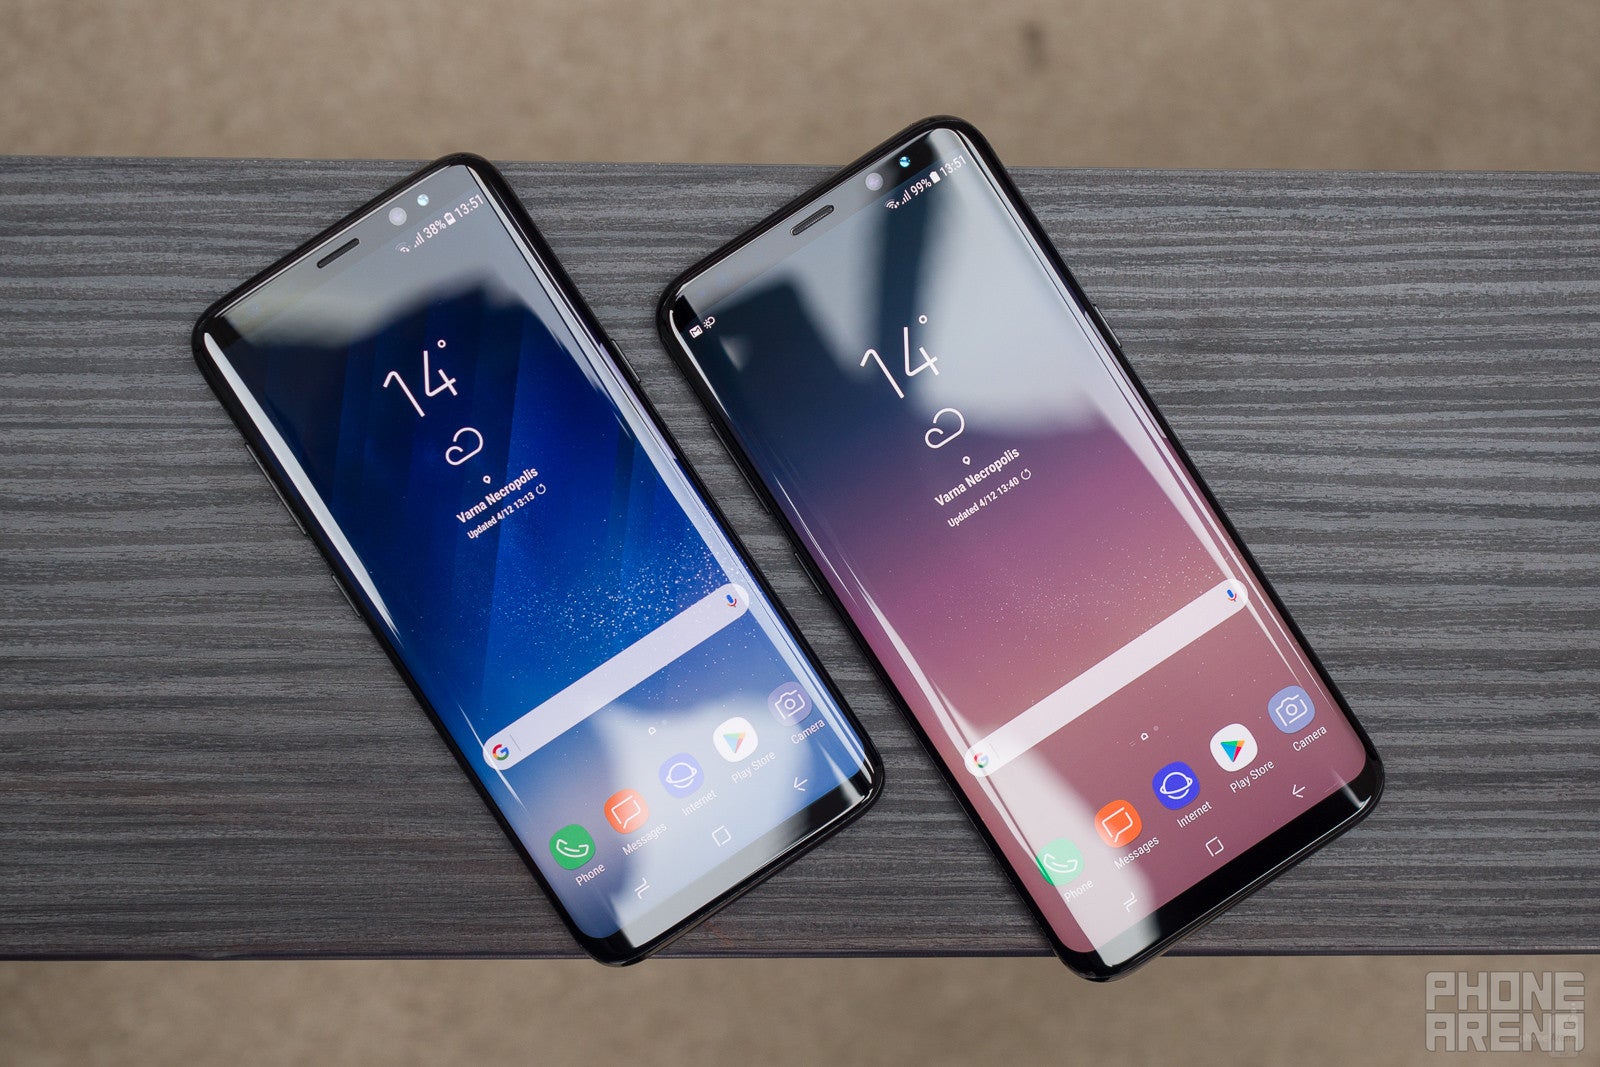 PhoneArena authors' personal thoughts on the Samsung Galaxy S8 and S8+